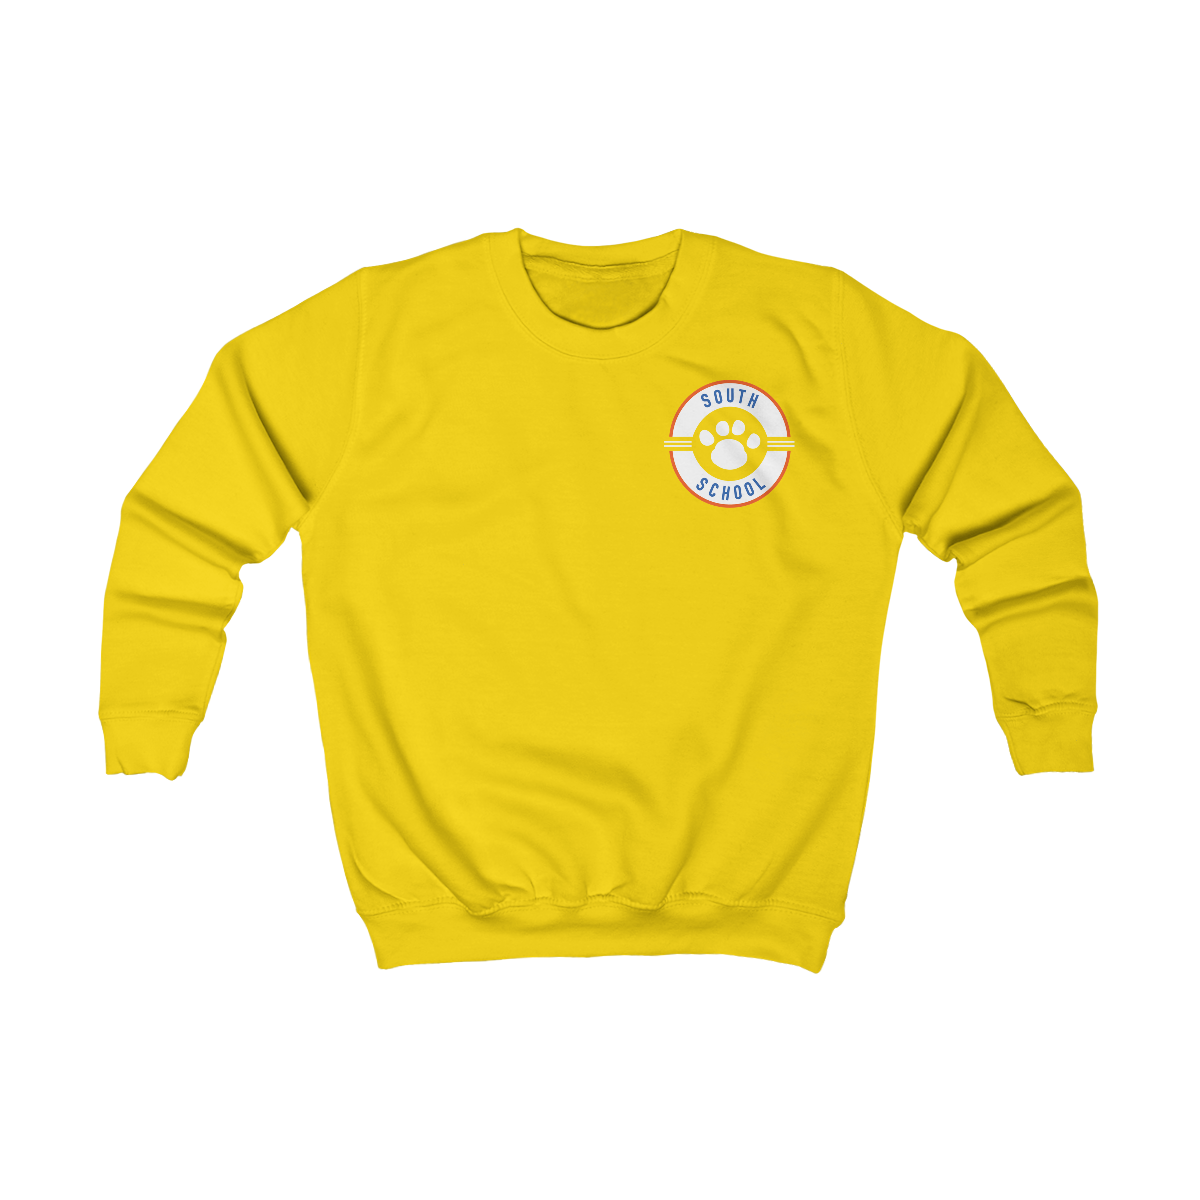 Youth Crewneck Sweatshirt, South Tiger Paw (Multiple Colors Available)